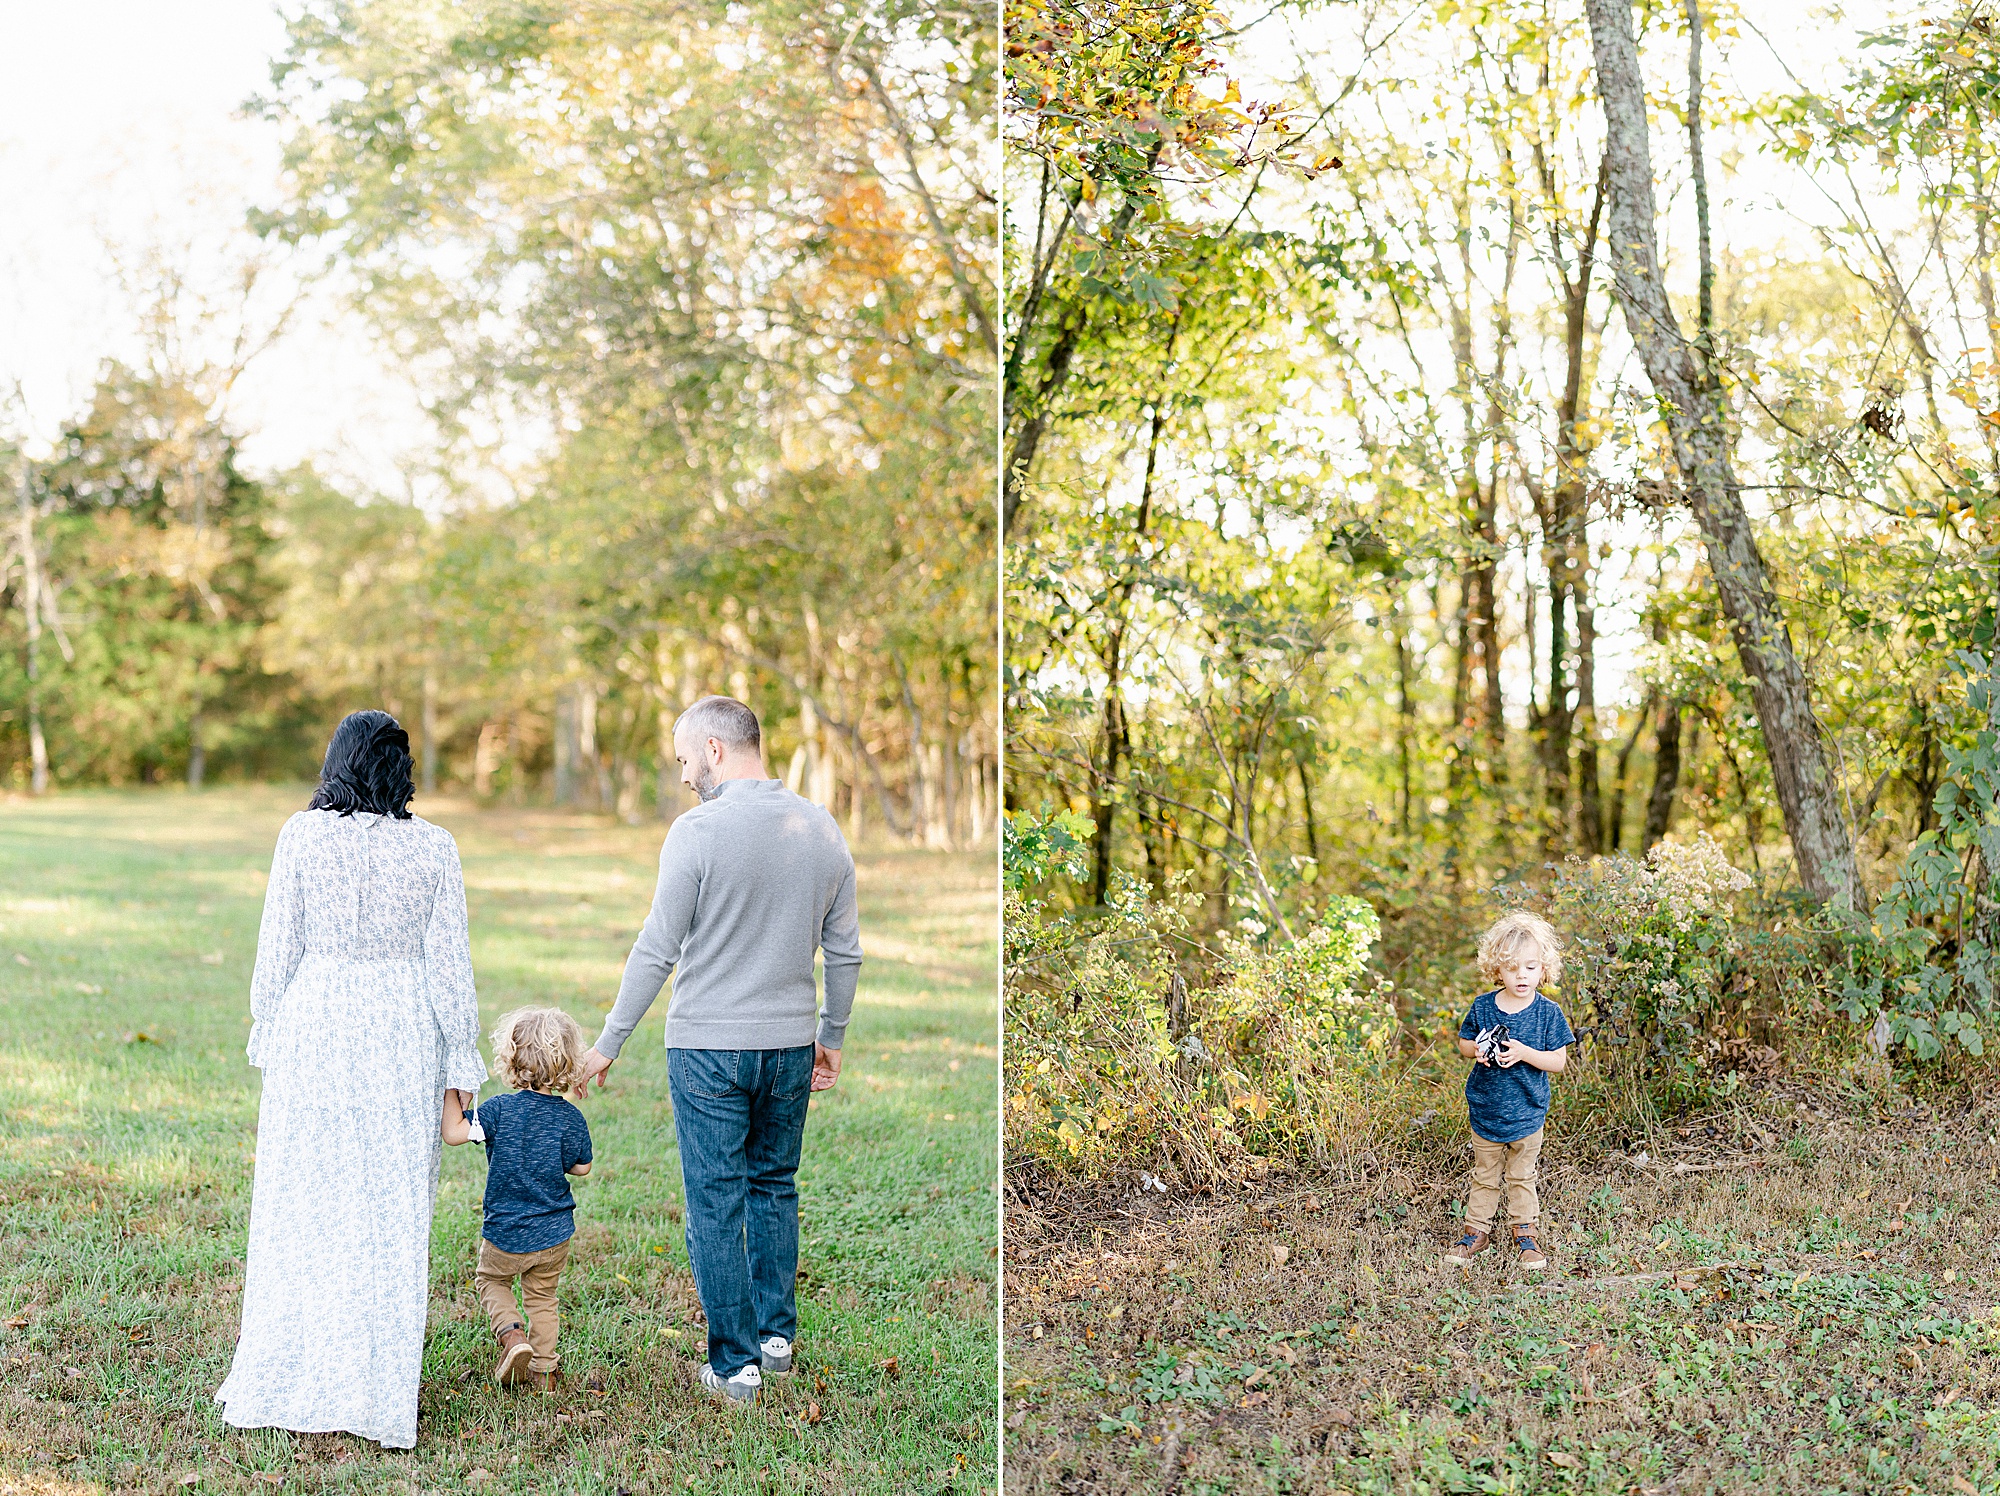 mom and dad walk together with their son as he plays and explores